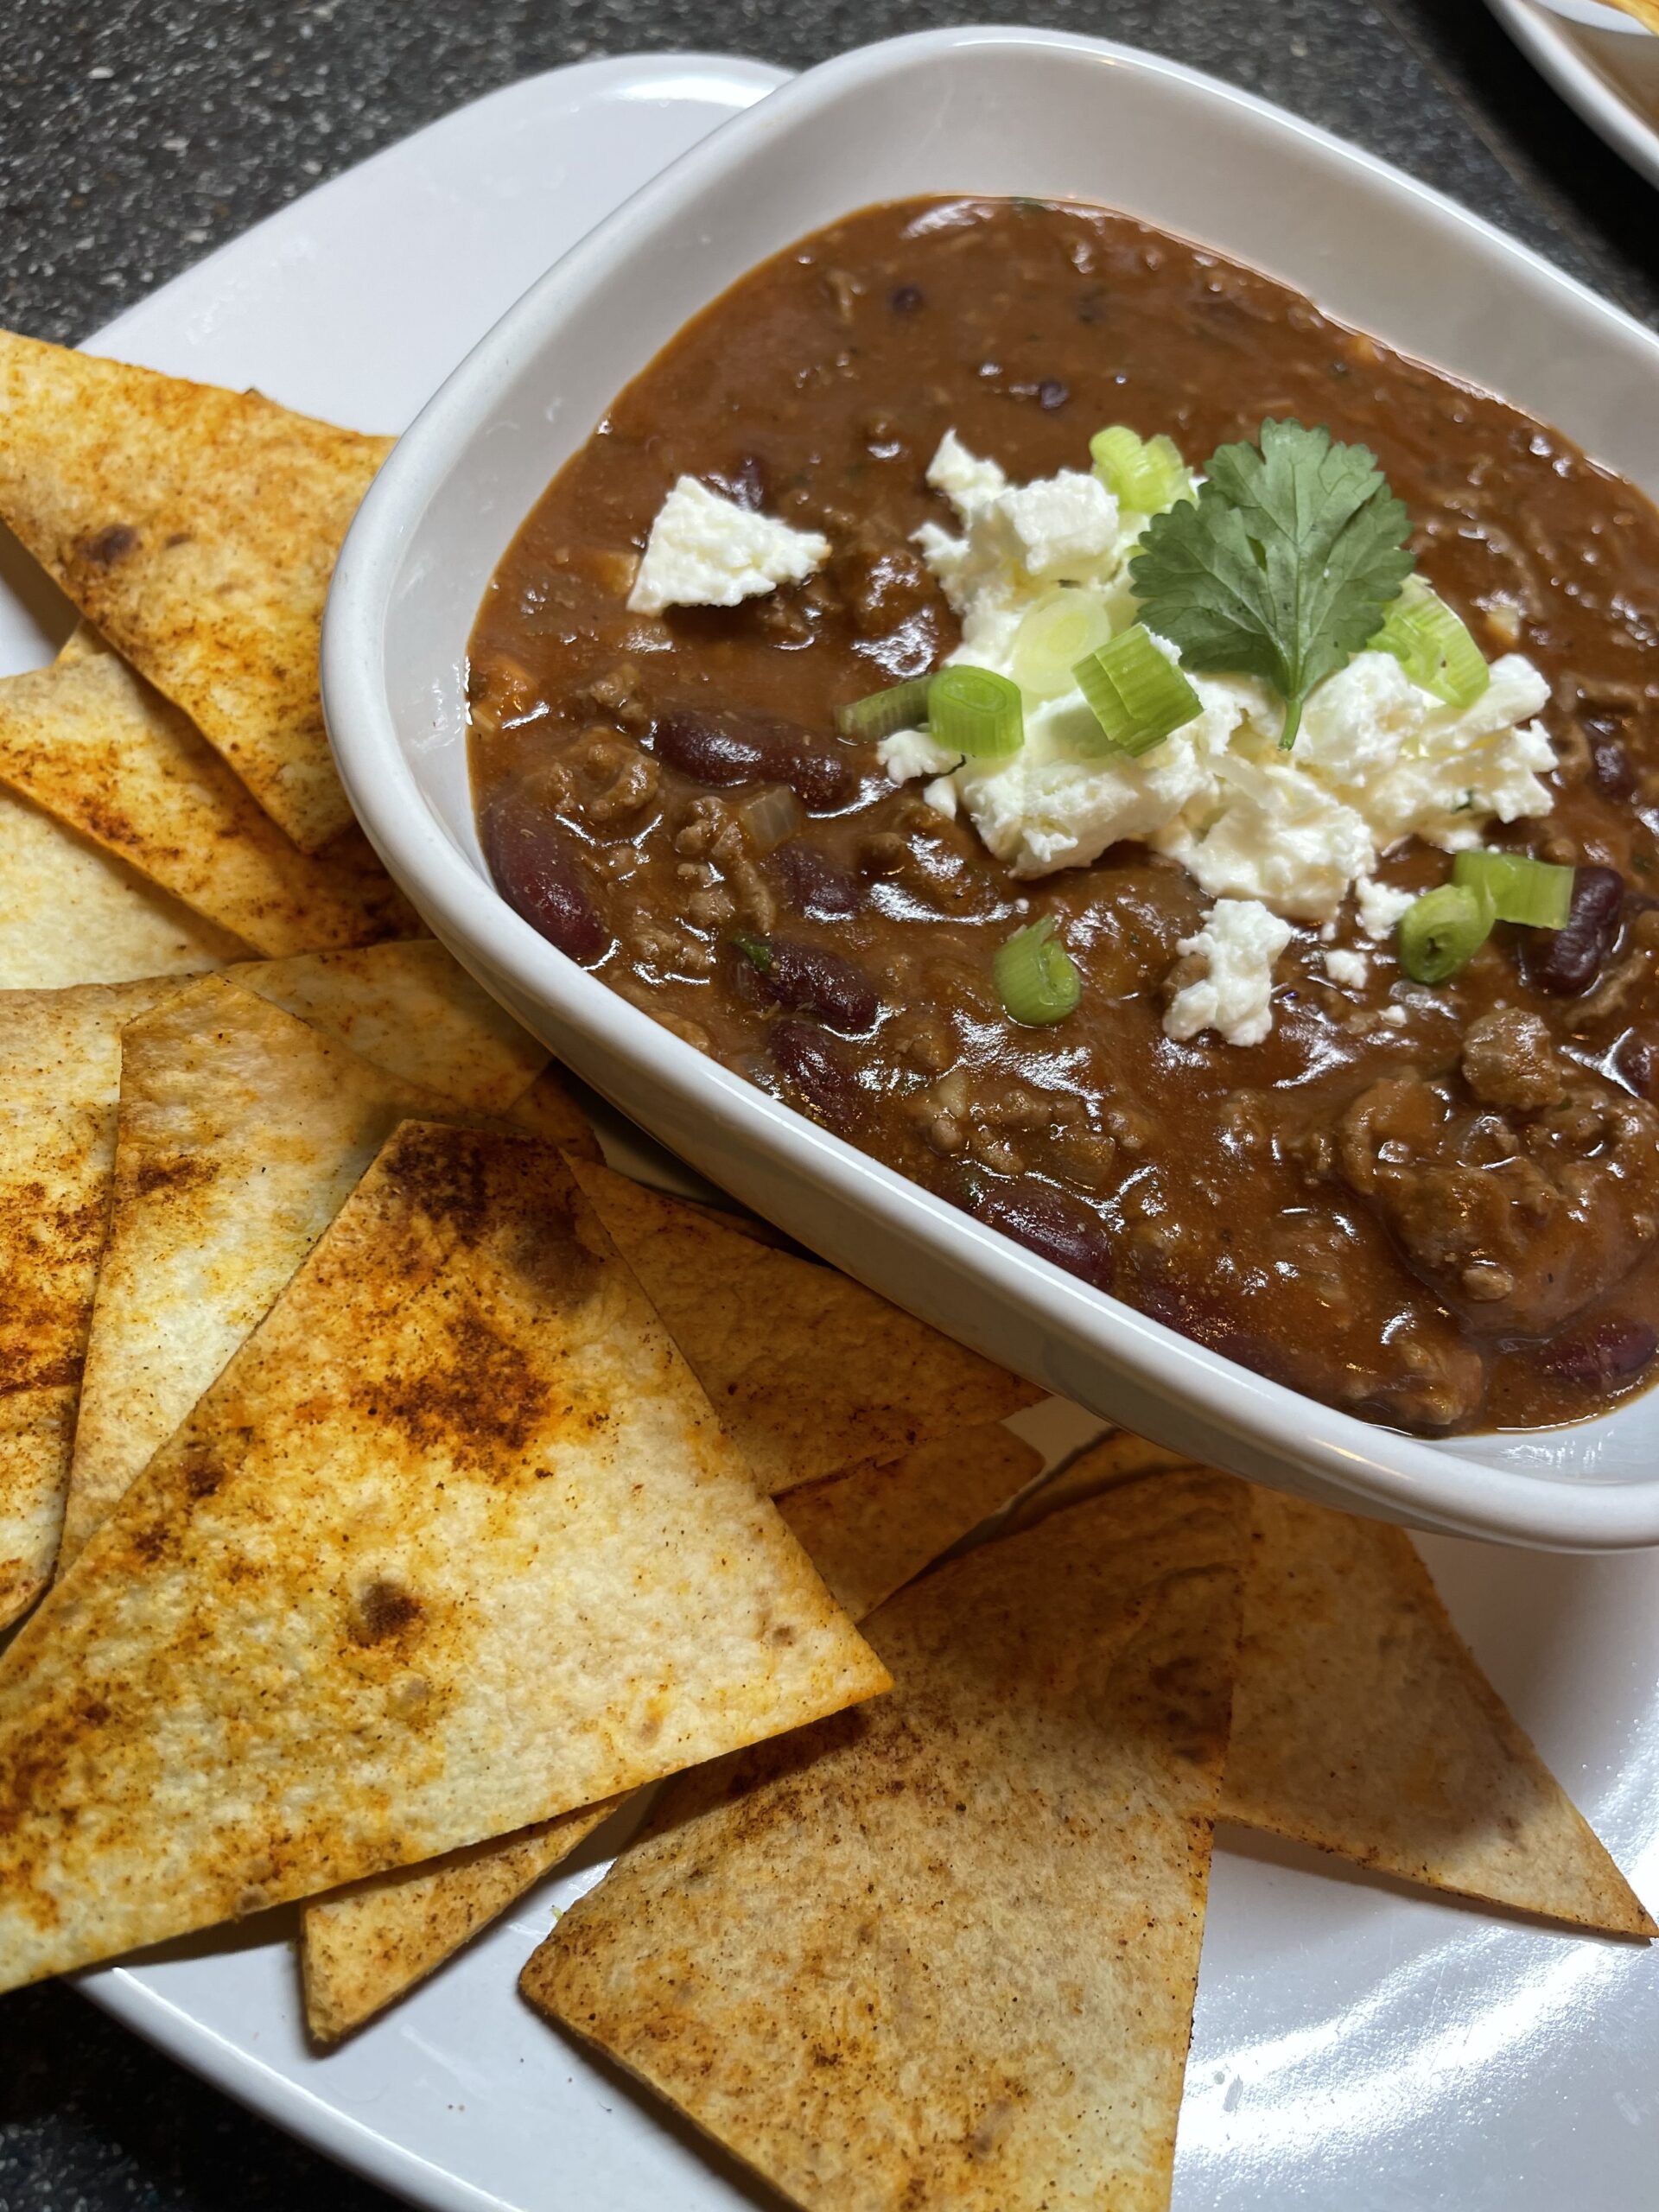 The Midas - Chilli Con Carne with tortilla chips